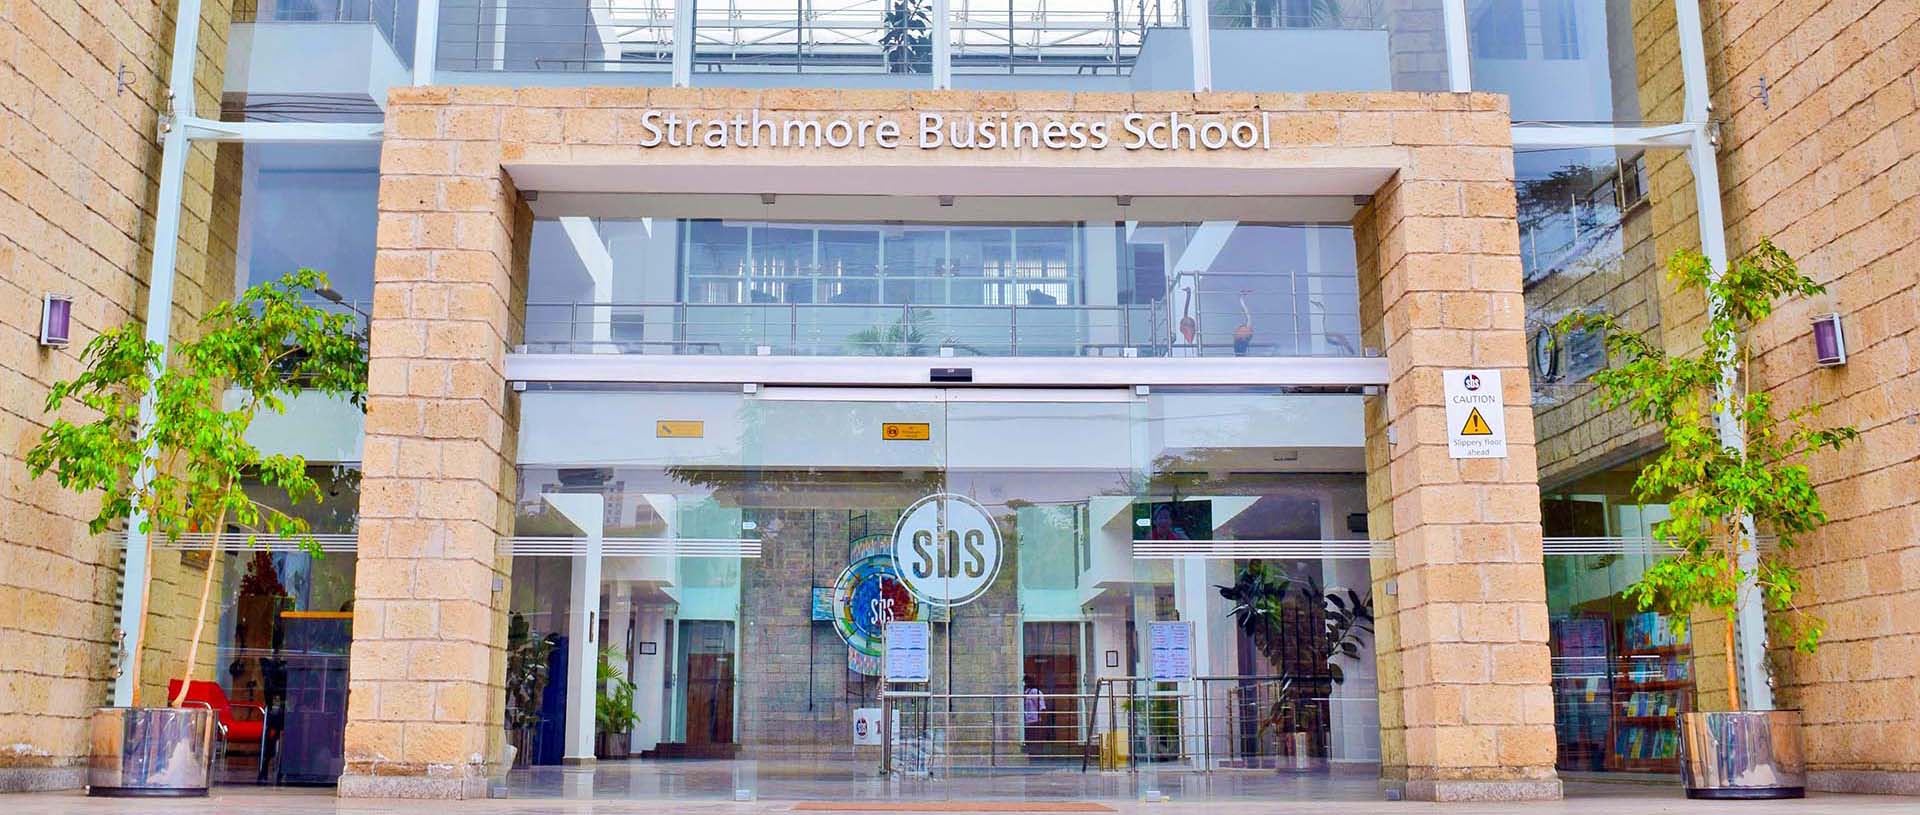 Corporate Brand Resources - Strathmore University Business School